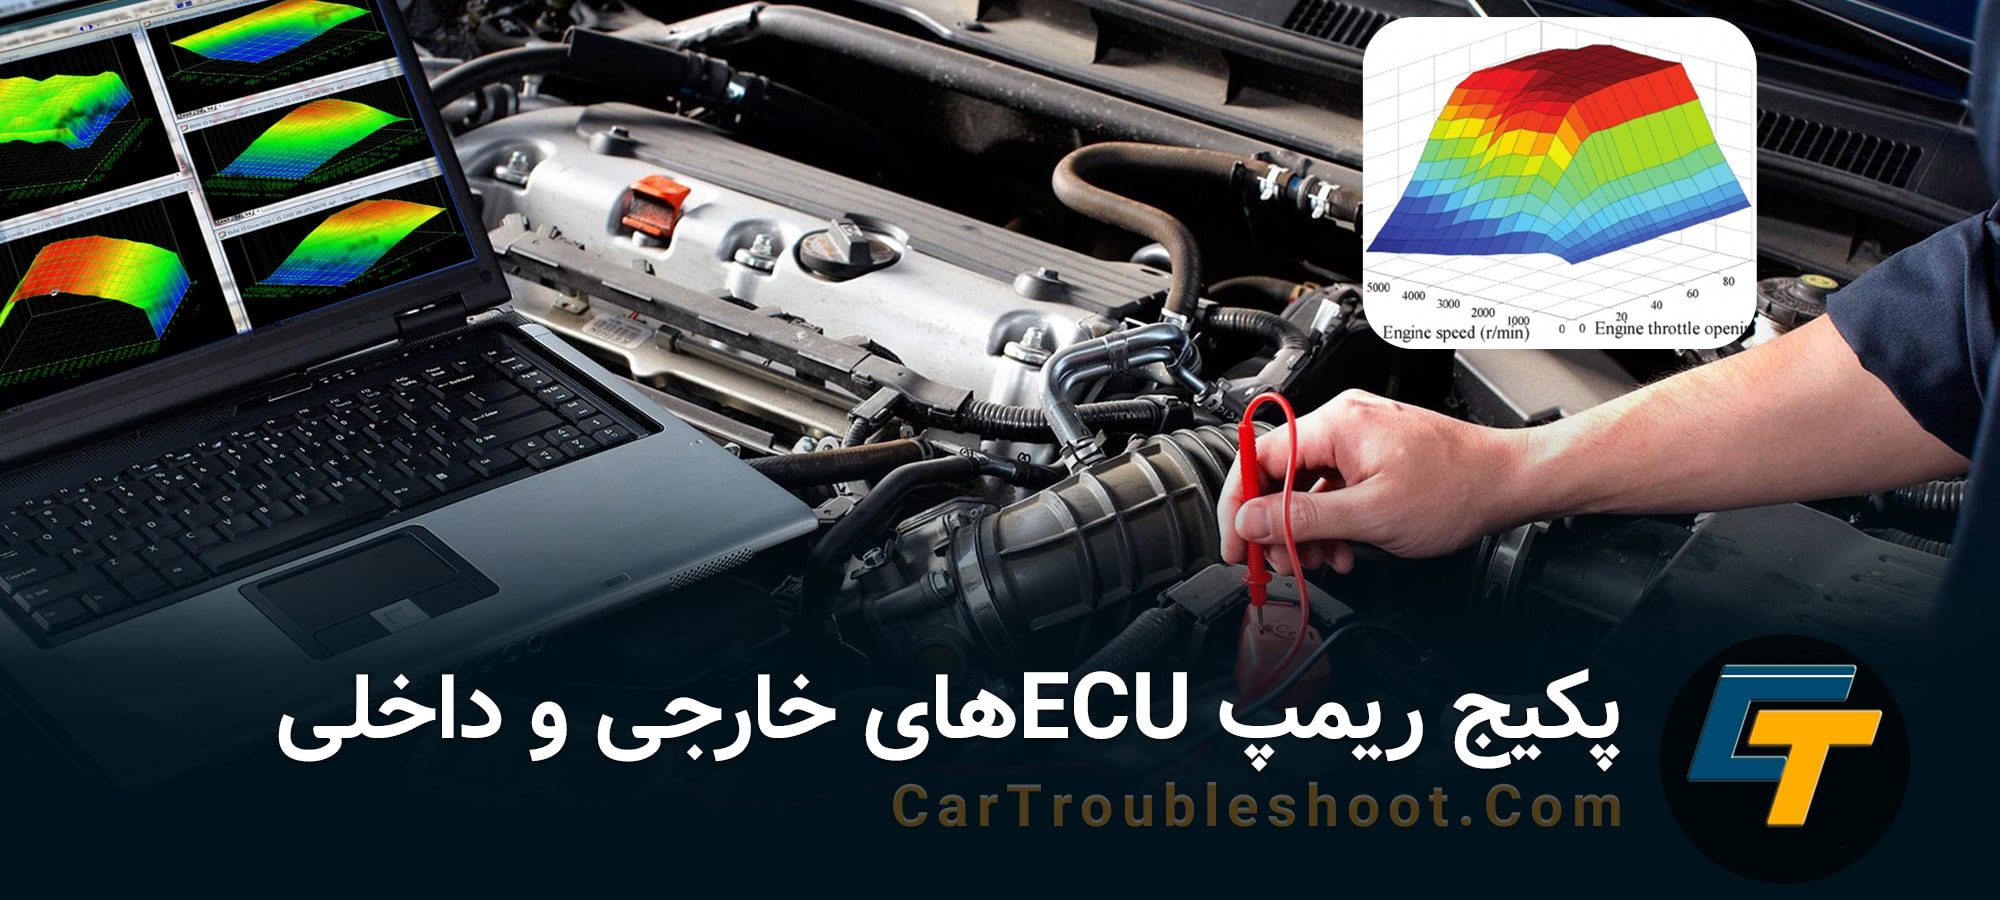 Cartroubleshoot